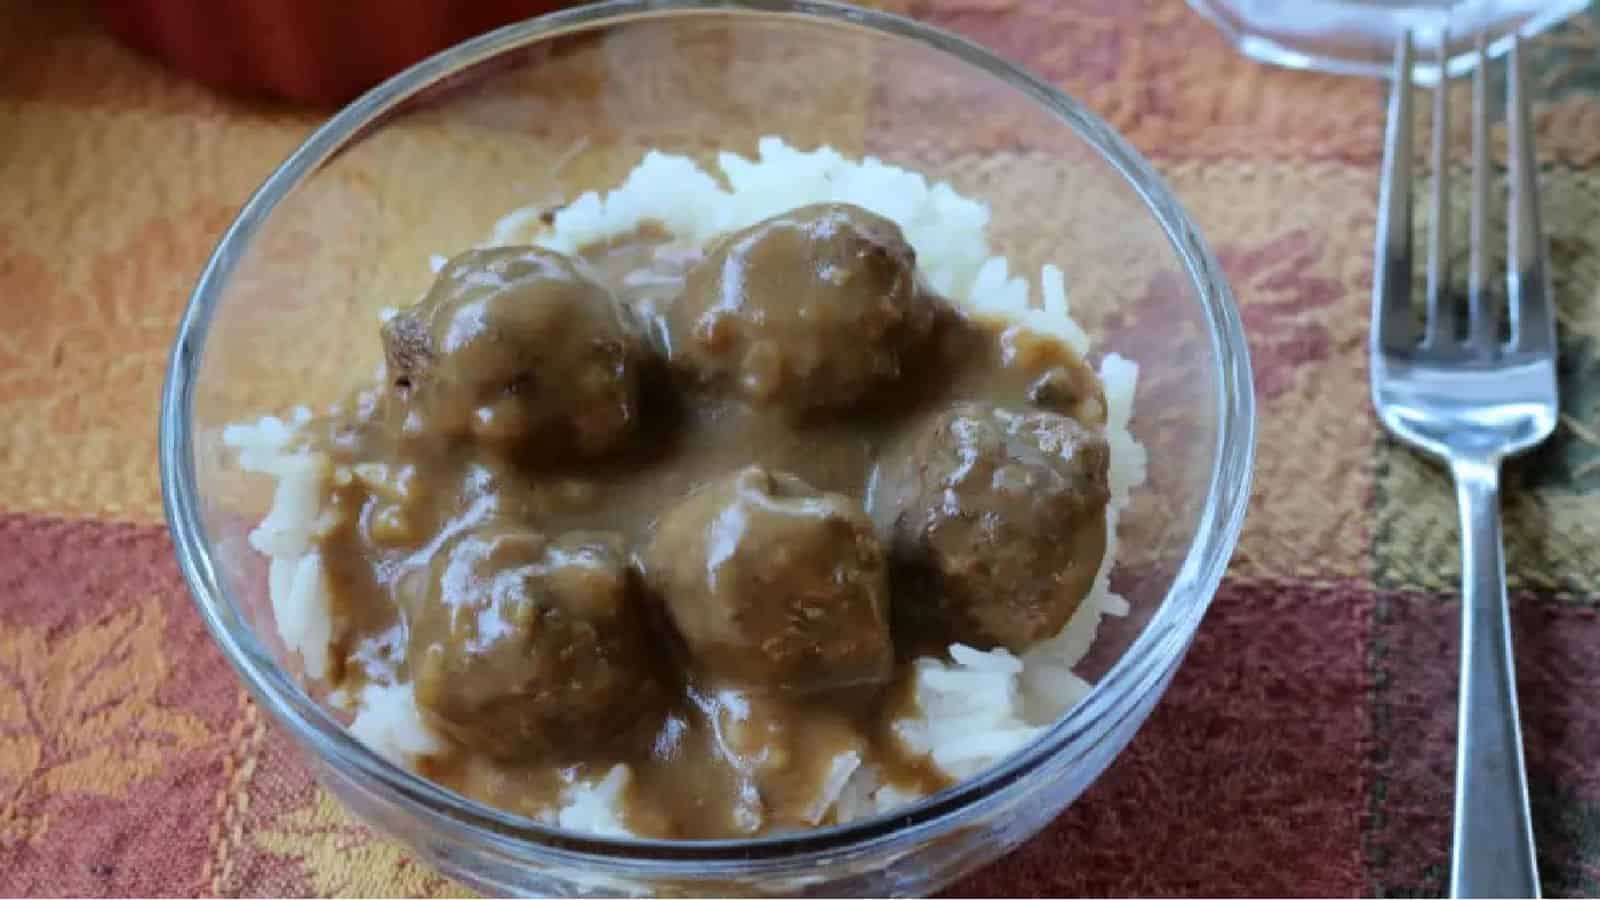 Glass bowl of meatballs and gravy over rice, fork to the side, grapes in the background.